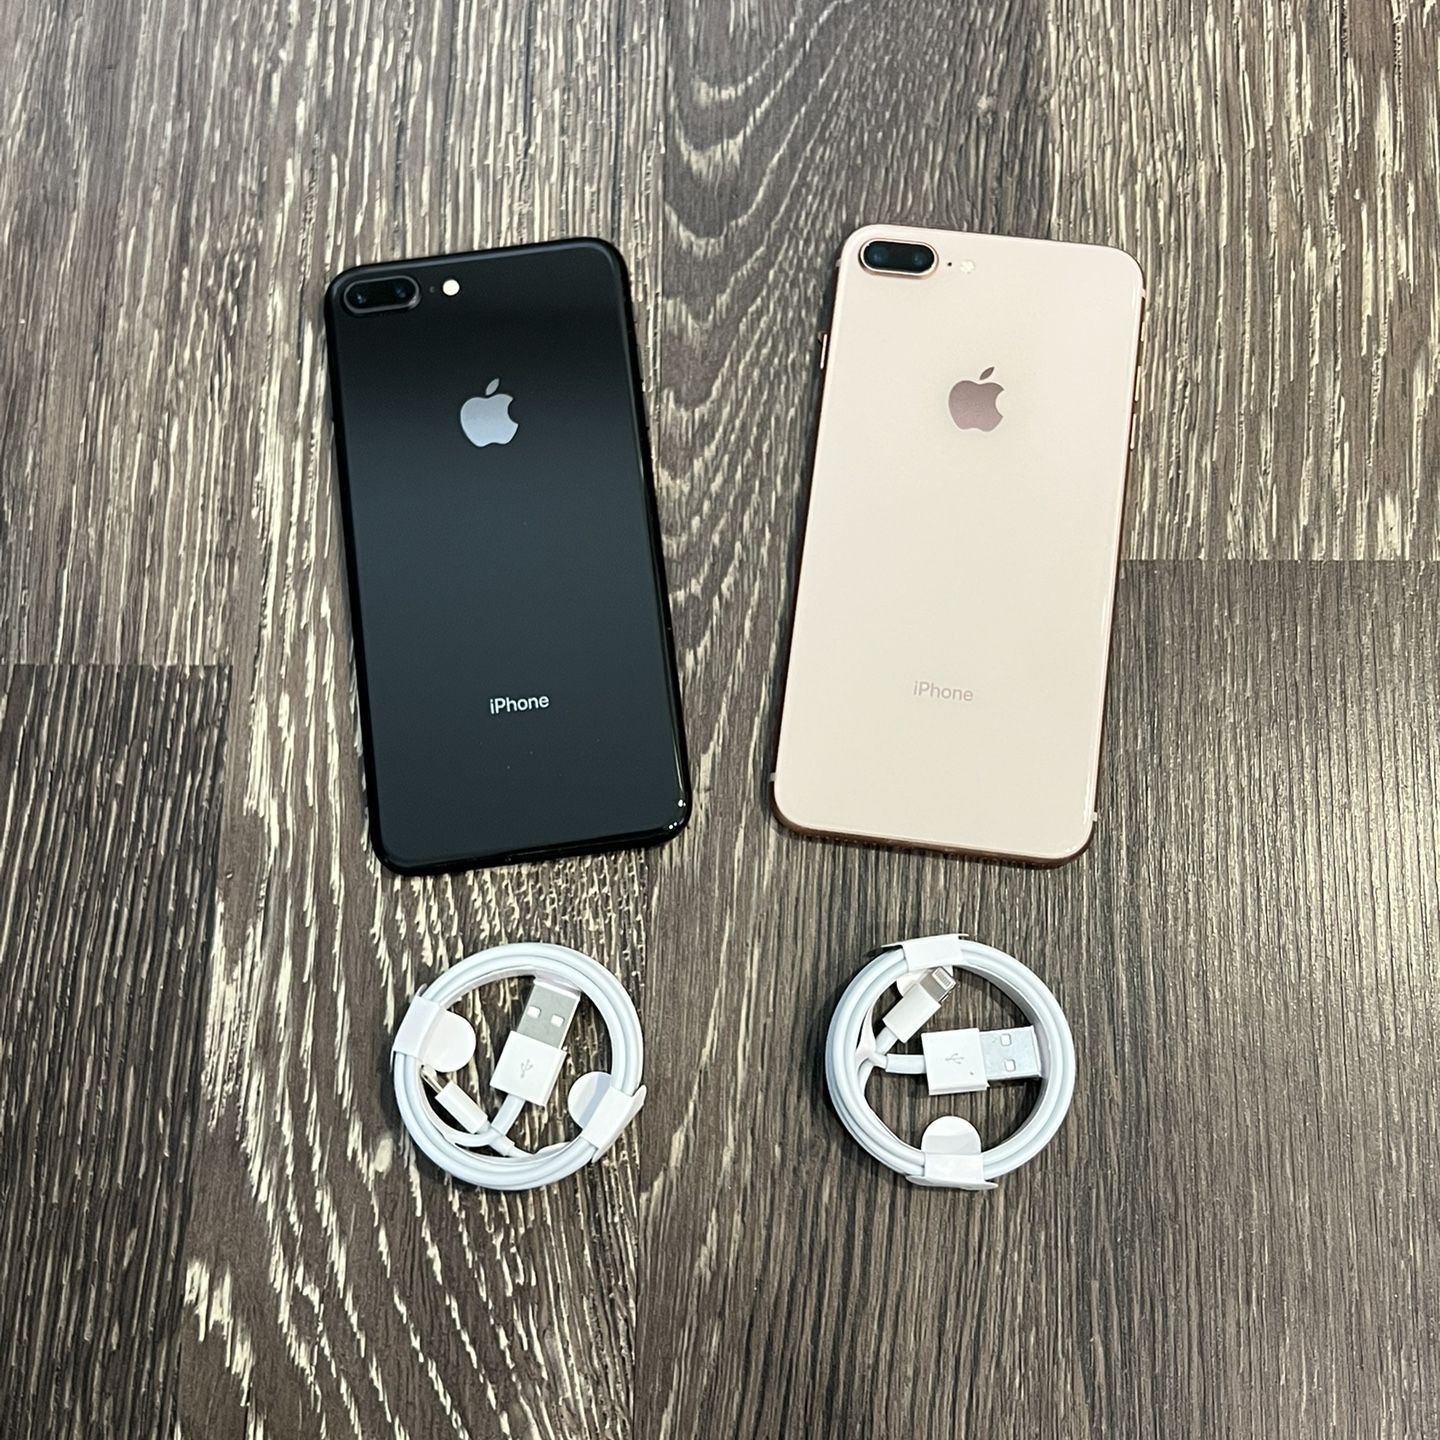 iPhone 8 Plus UNLOCKED FOR ALL CARRIERS!